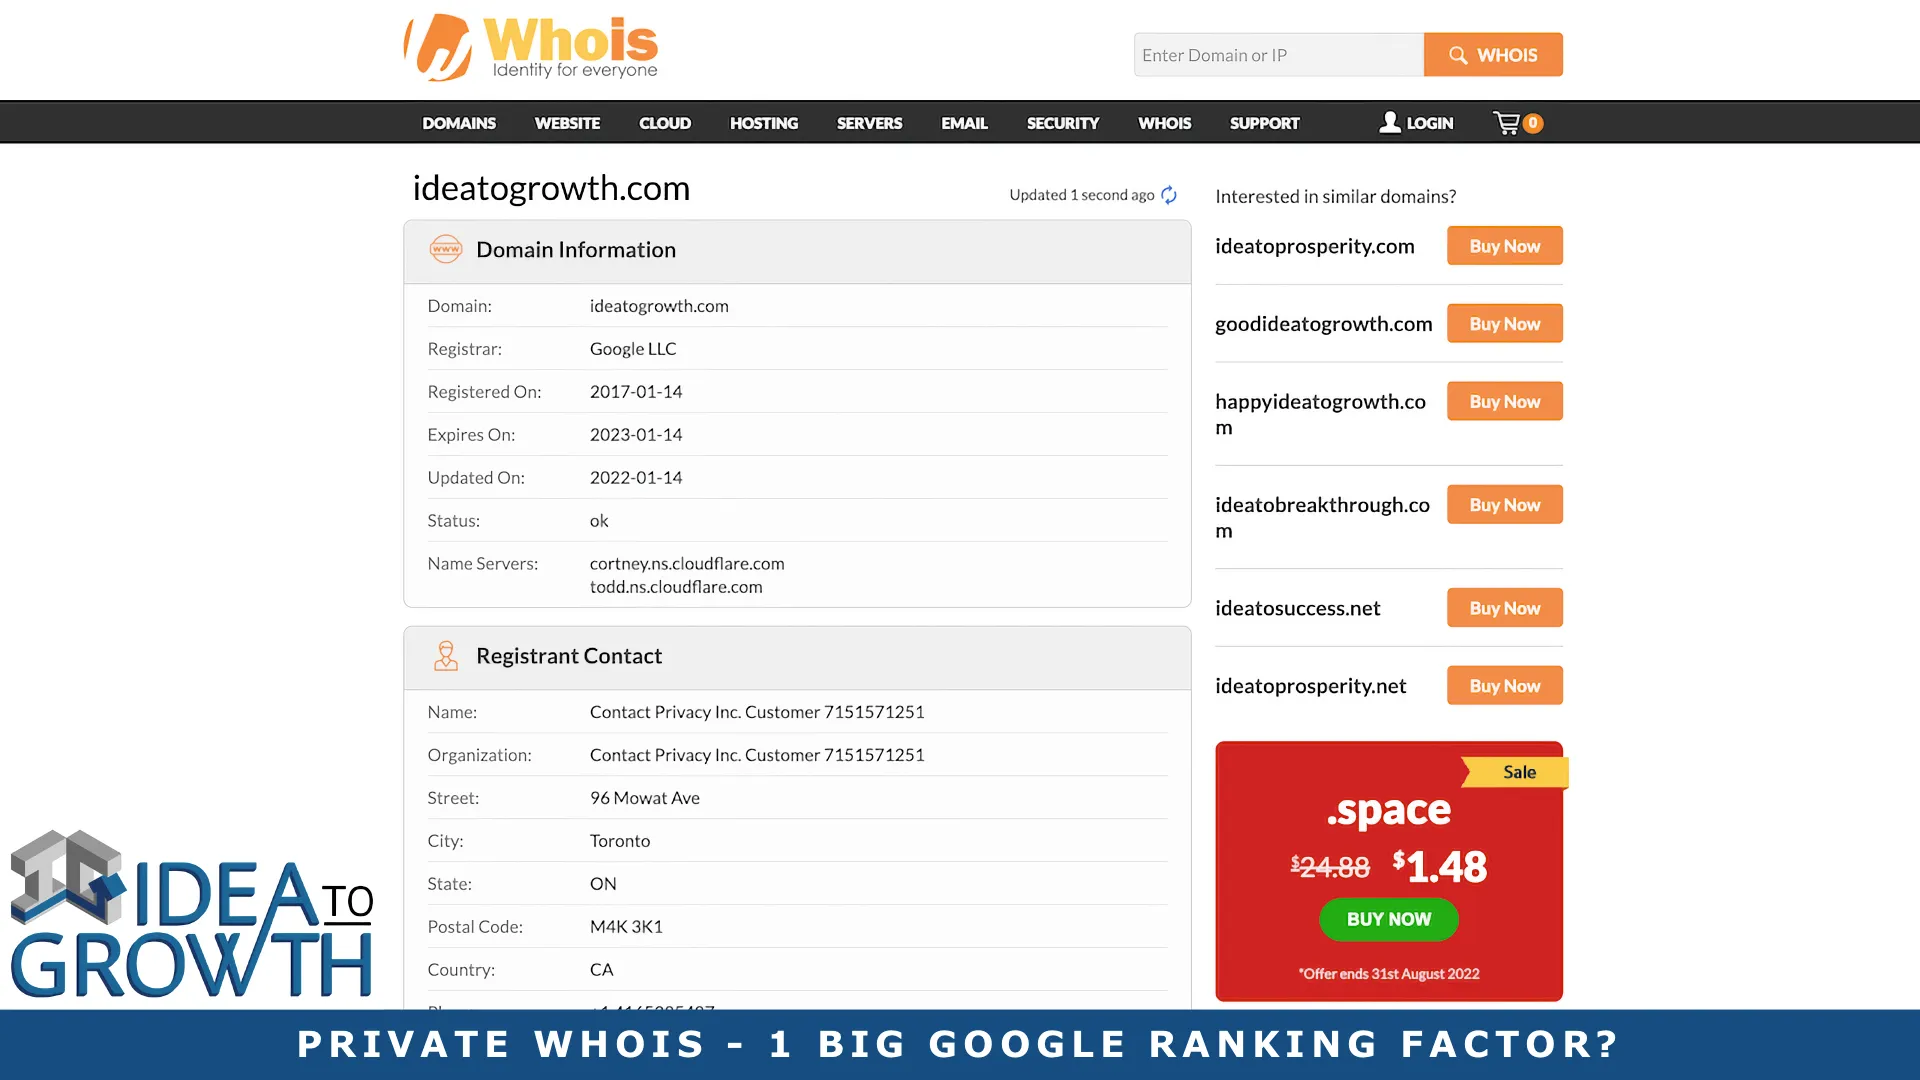 PRIVATE WHOIS - GOOGLE RANKING FACTOR?